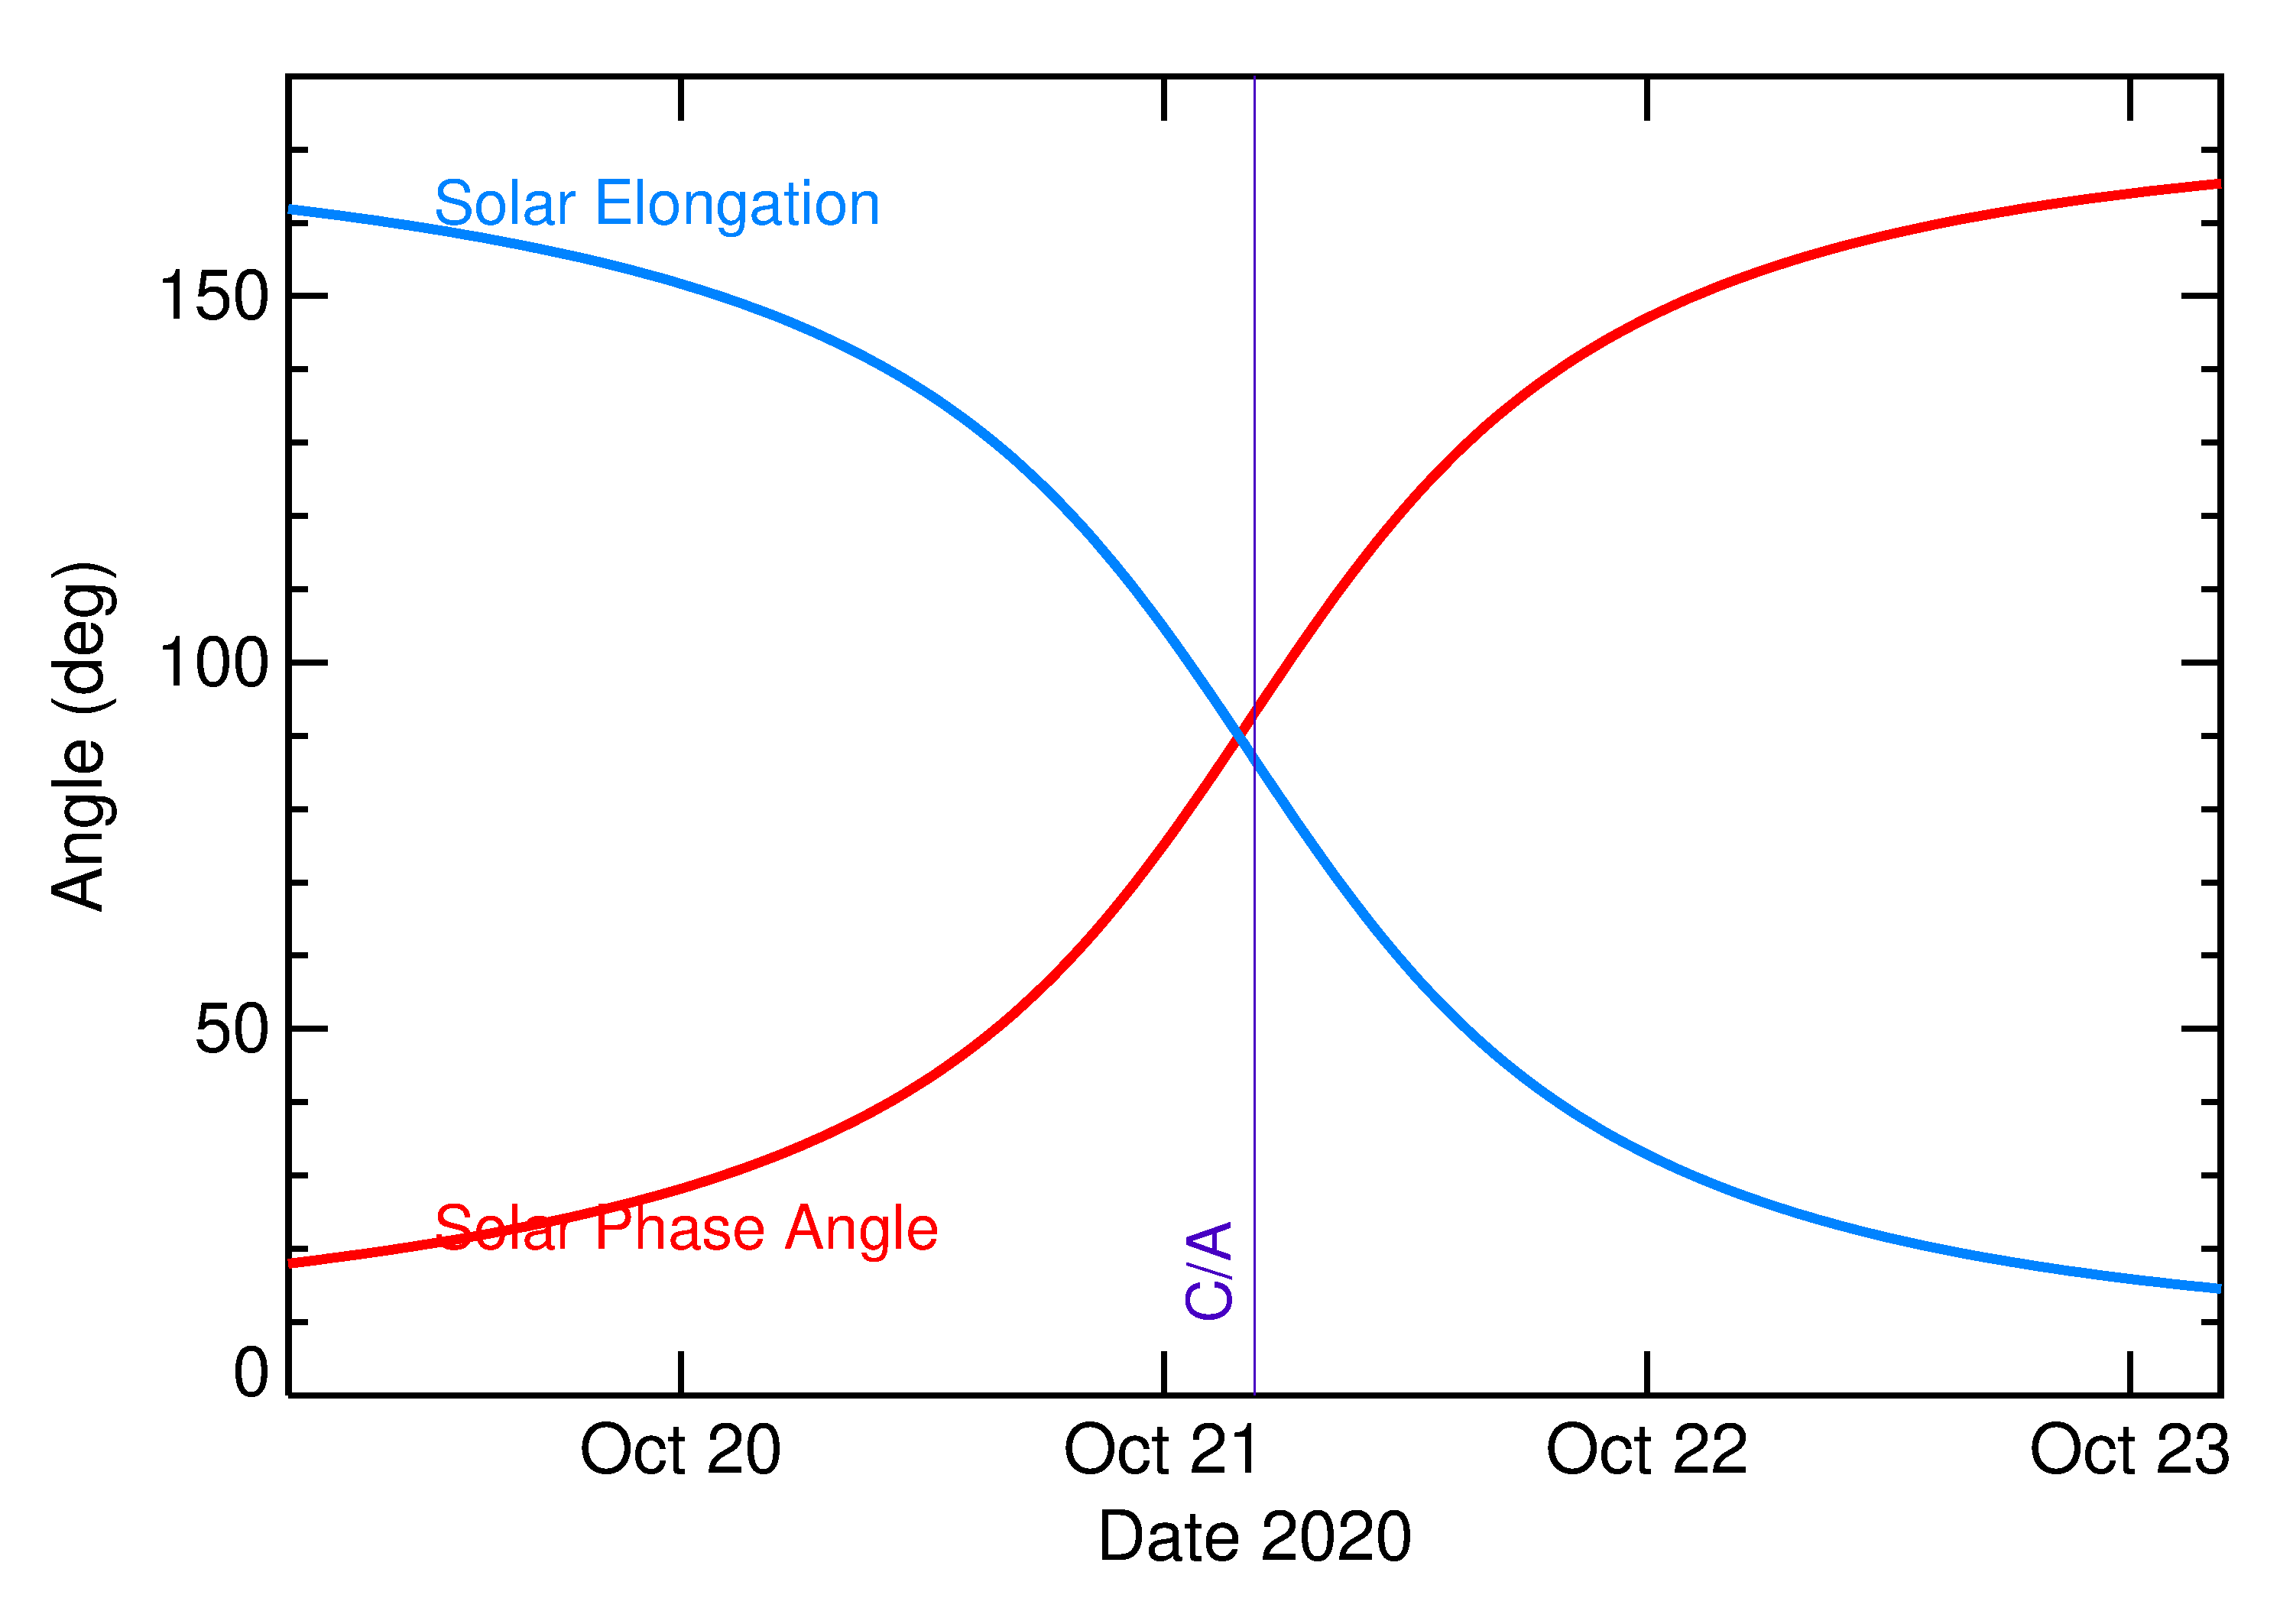 Solar Elongation and Solar Phase Angle of 2020 UY in the days around closest approach